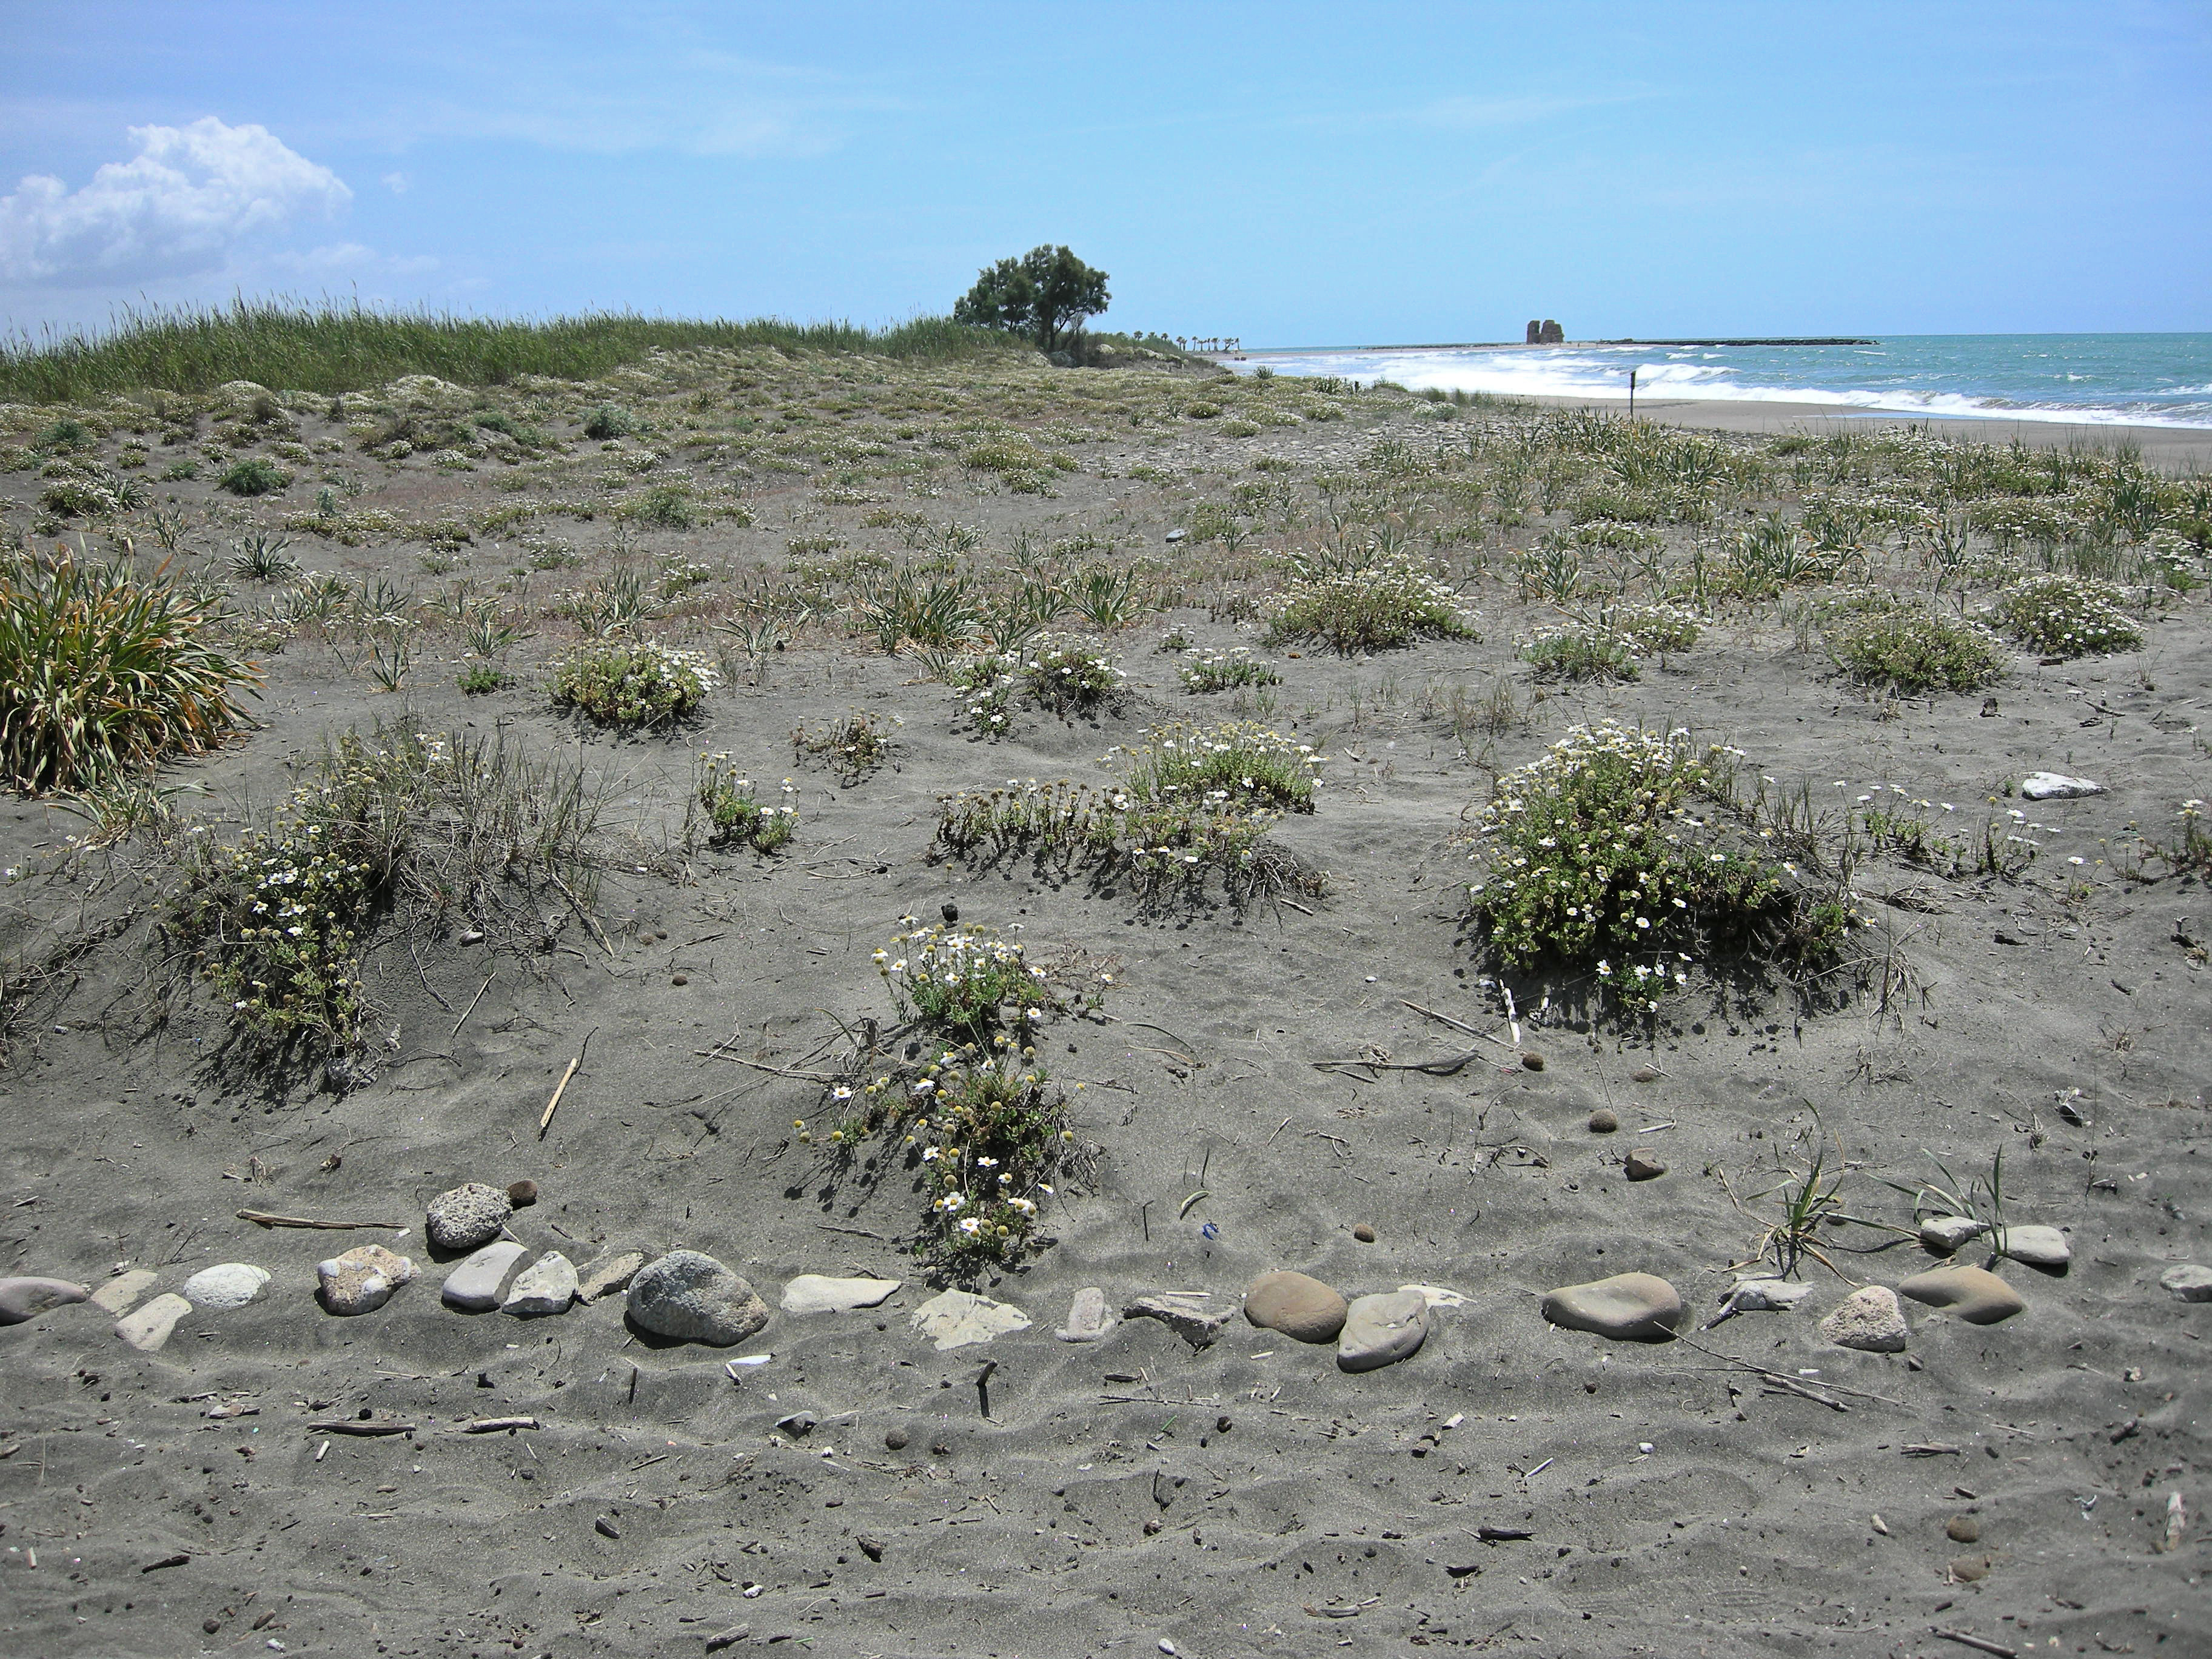 View of the coastal dune of Monumento Naturale Torre Flavia.